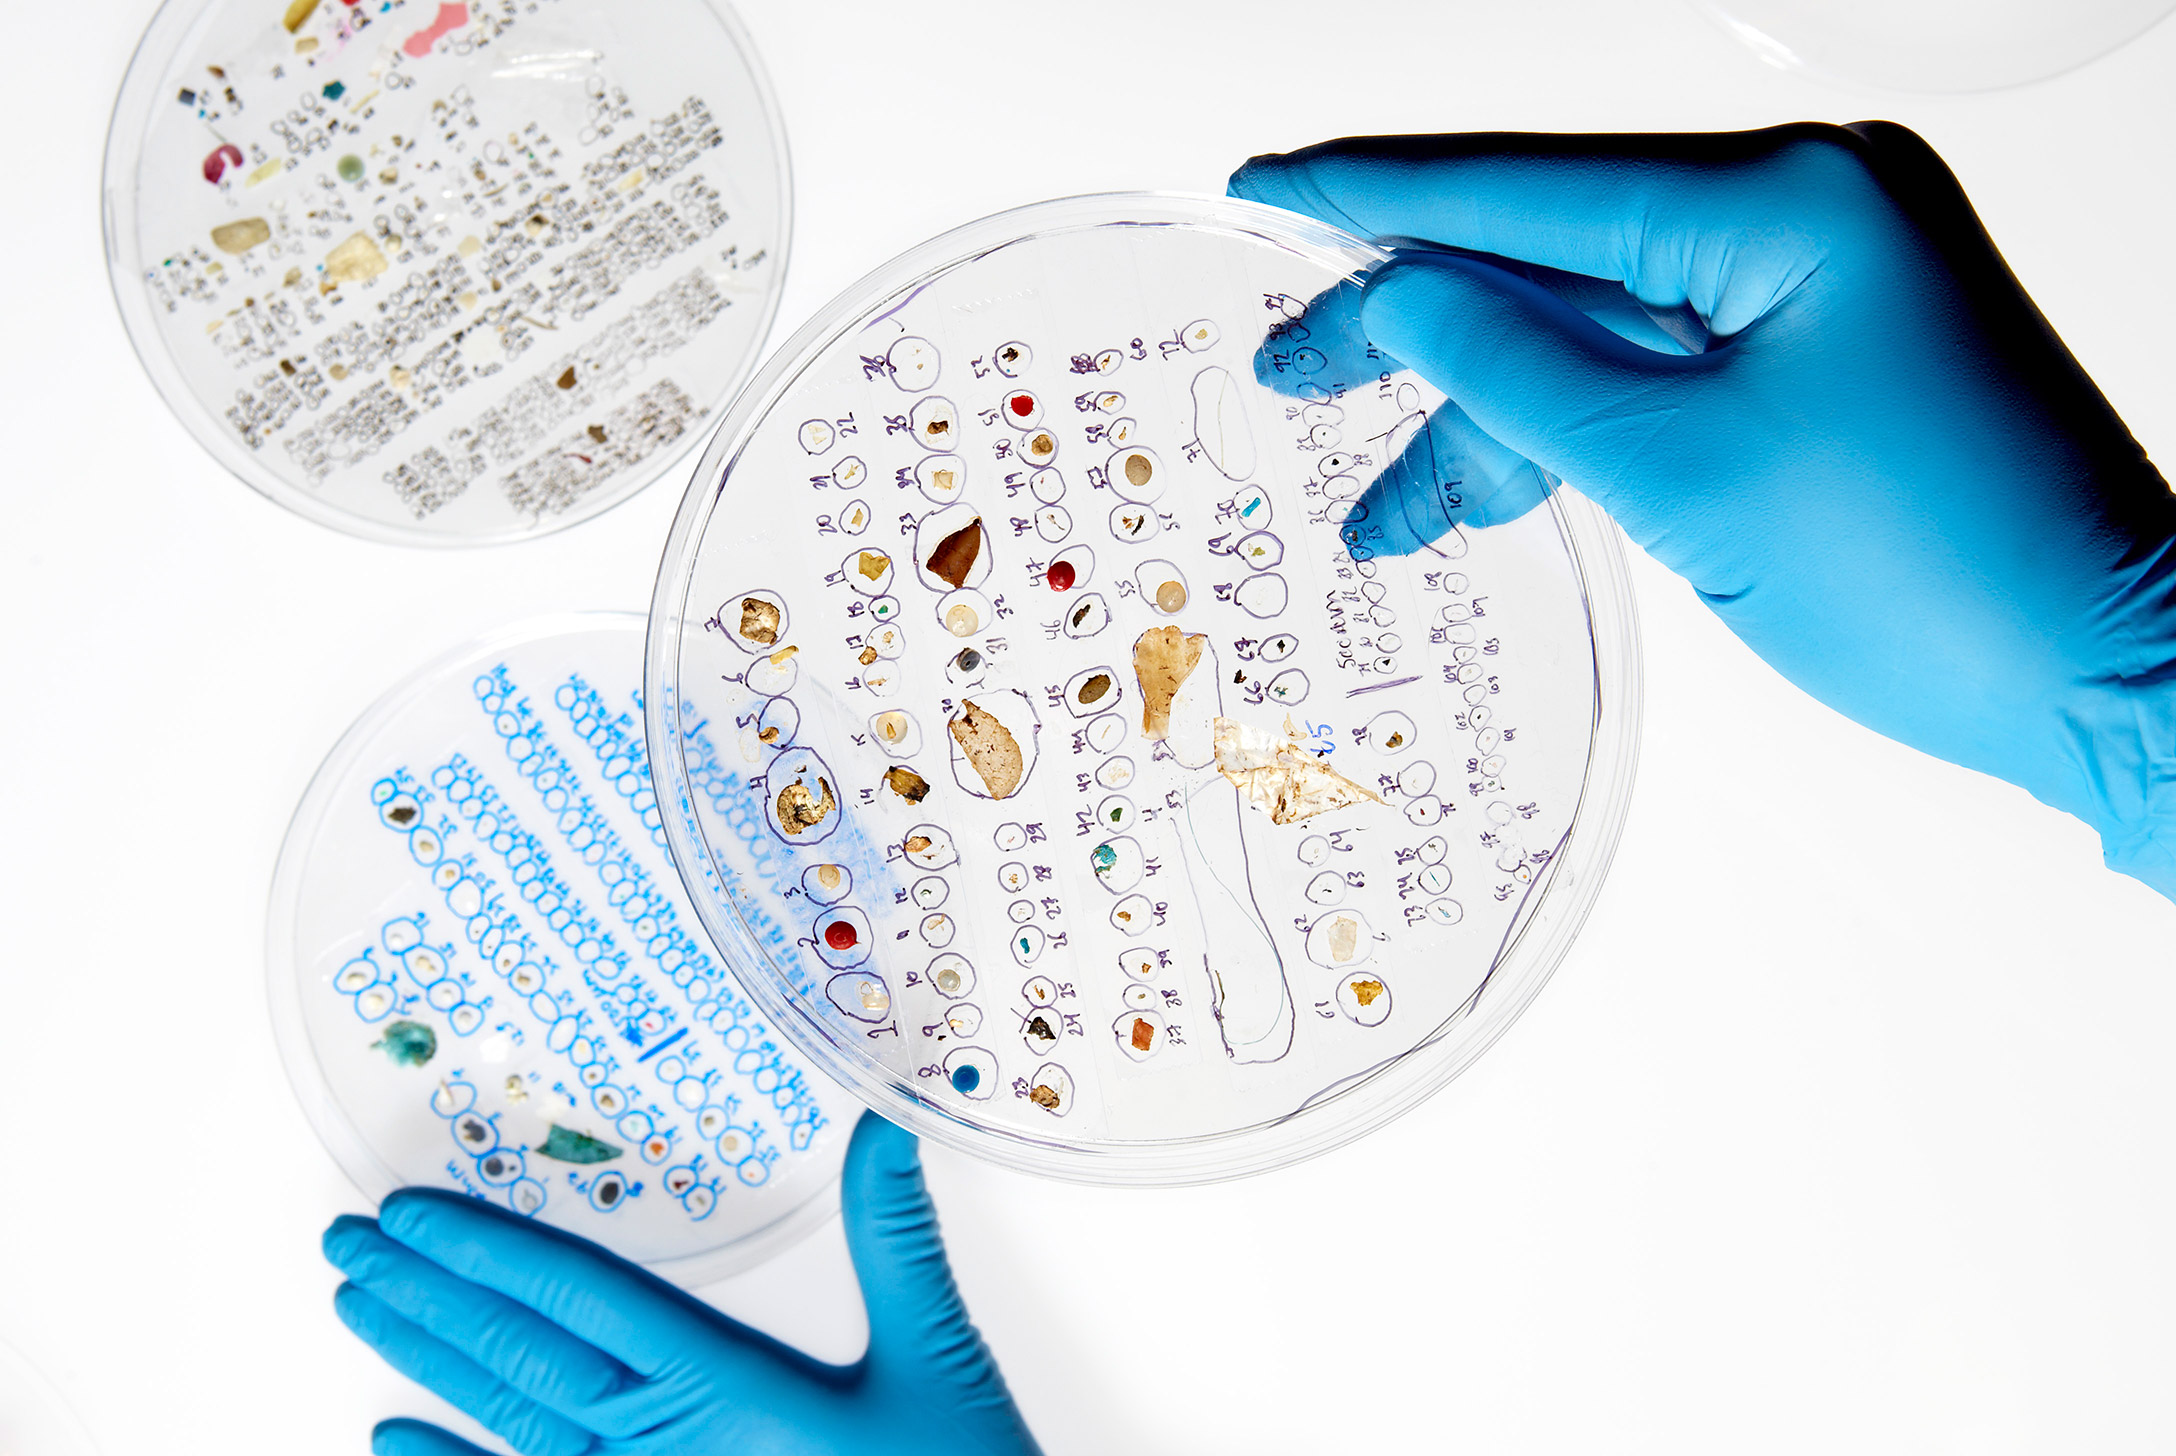 Three petri dishes containing microplastic samples